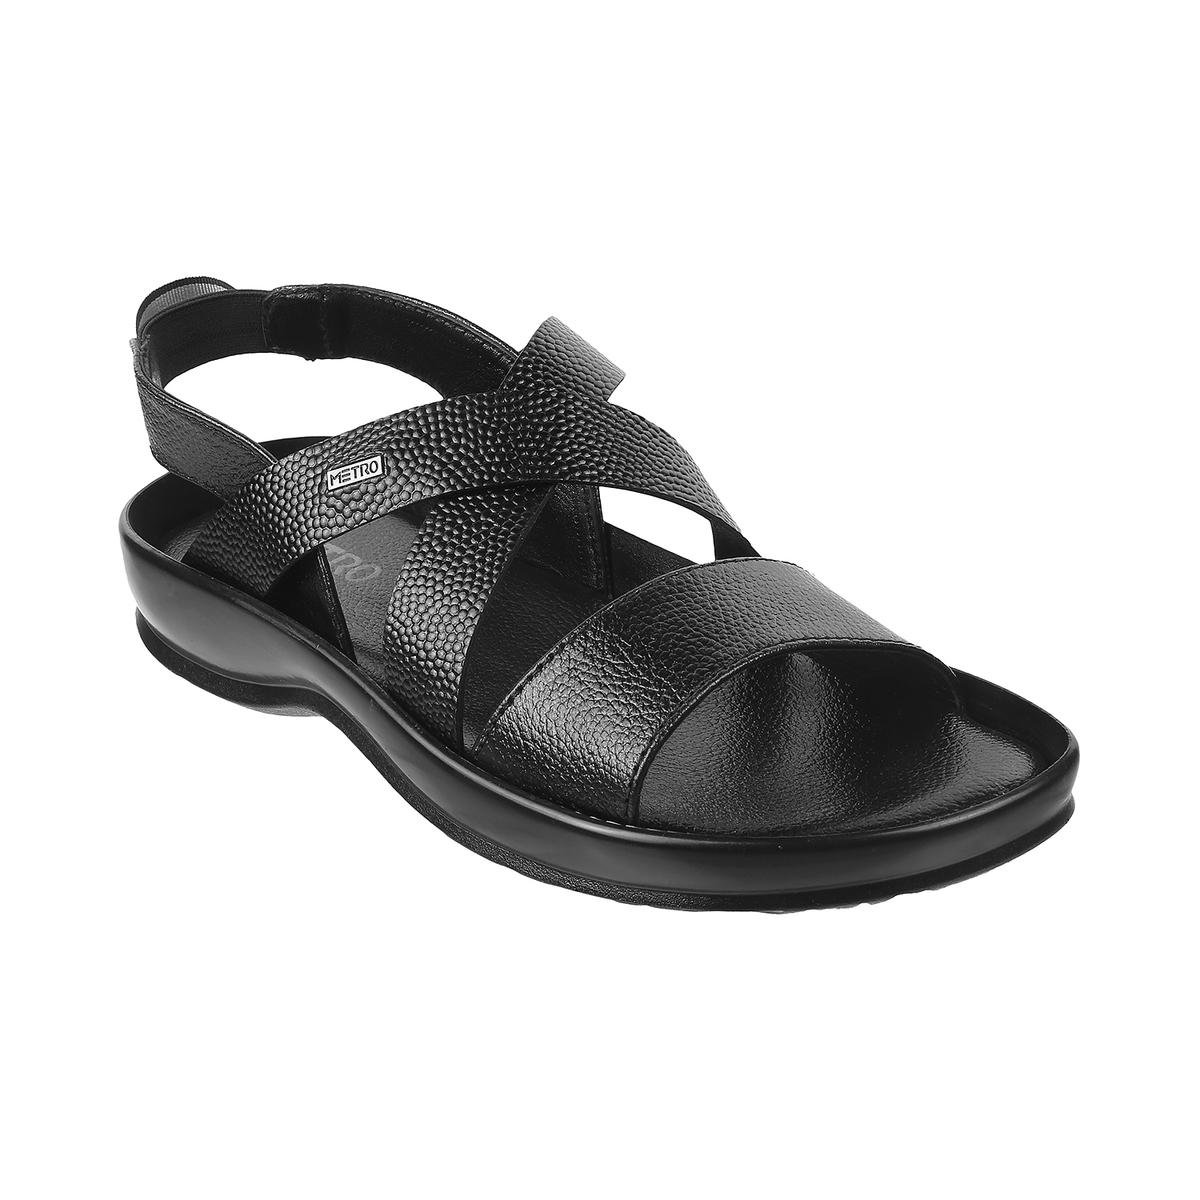 Share 201+ metro sandals for mens latest